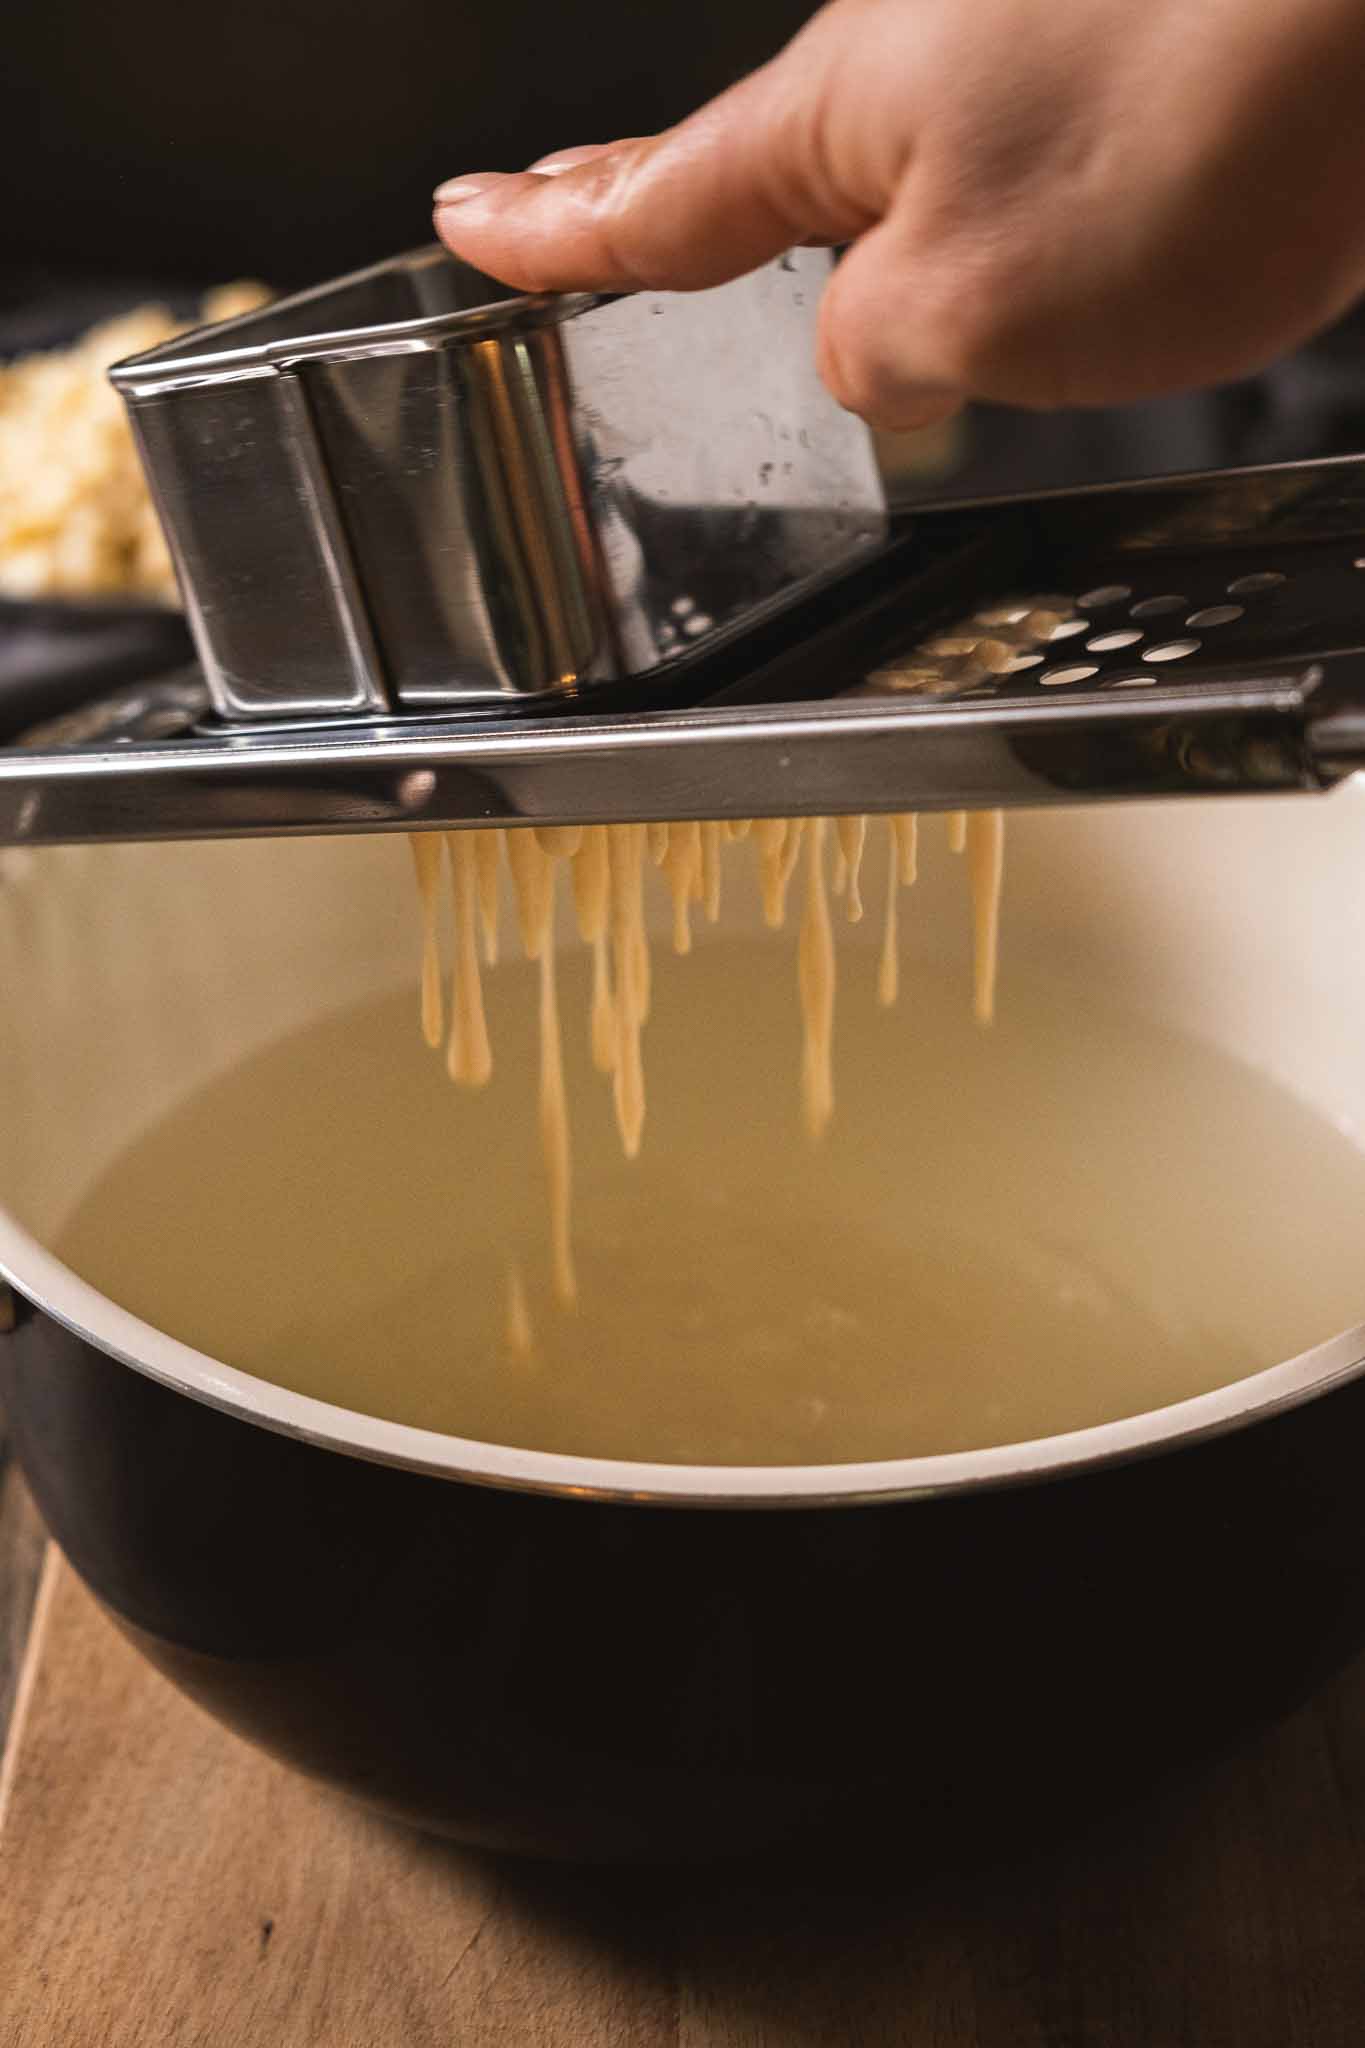 Spaetzle batter being passed through a spaetzle maker into a large pot of boiling water.